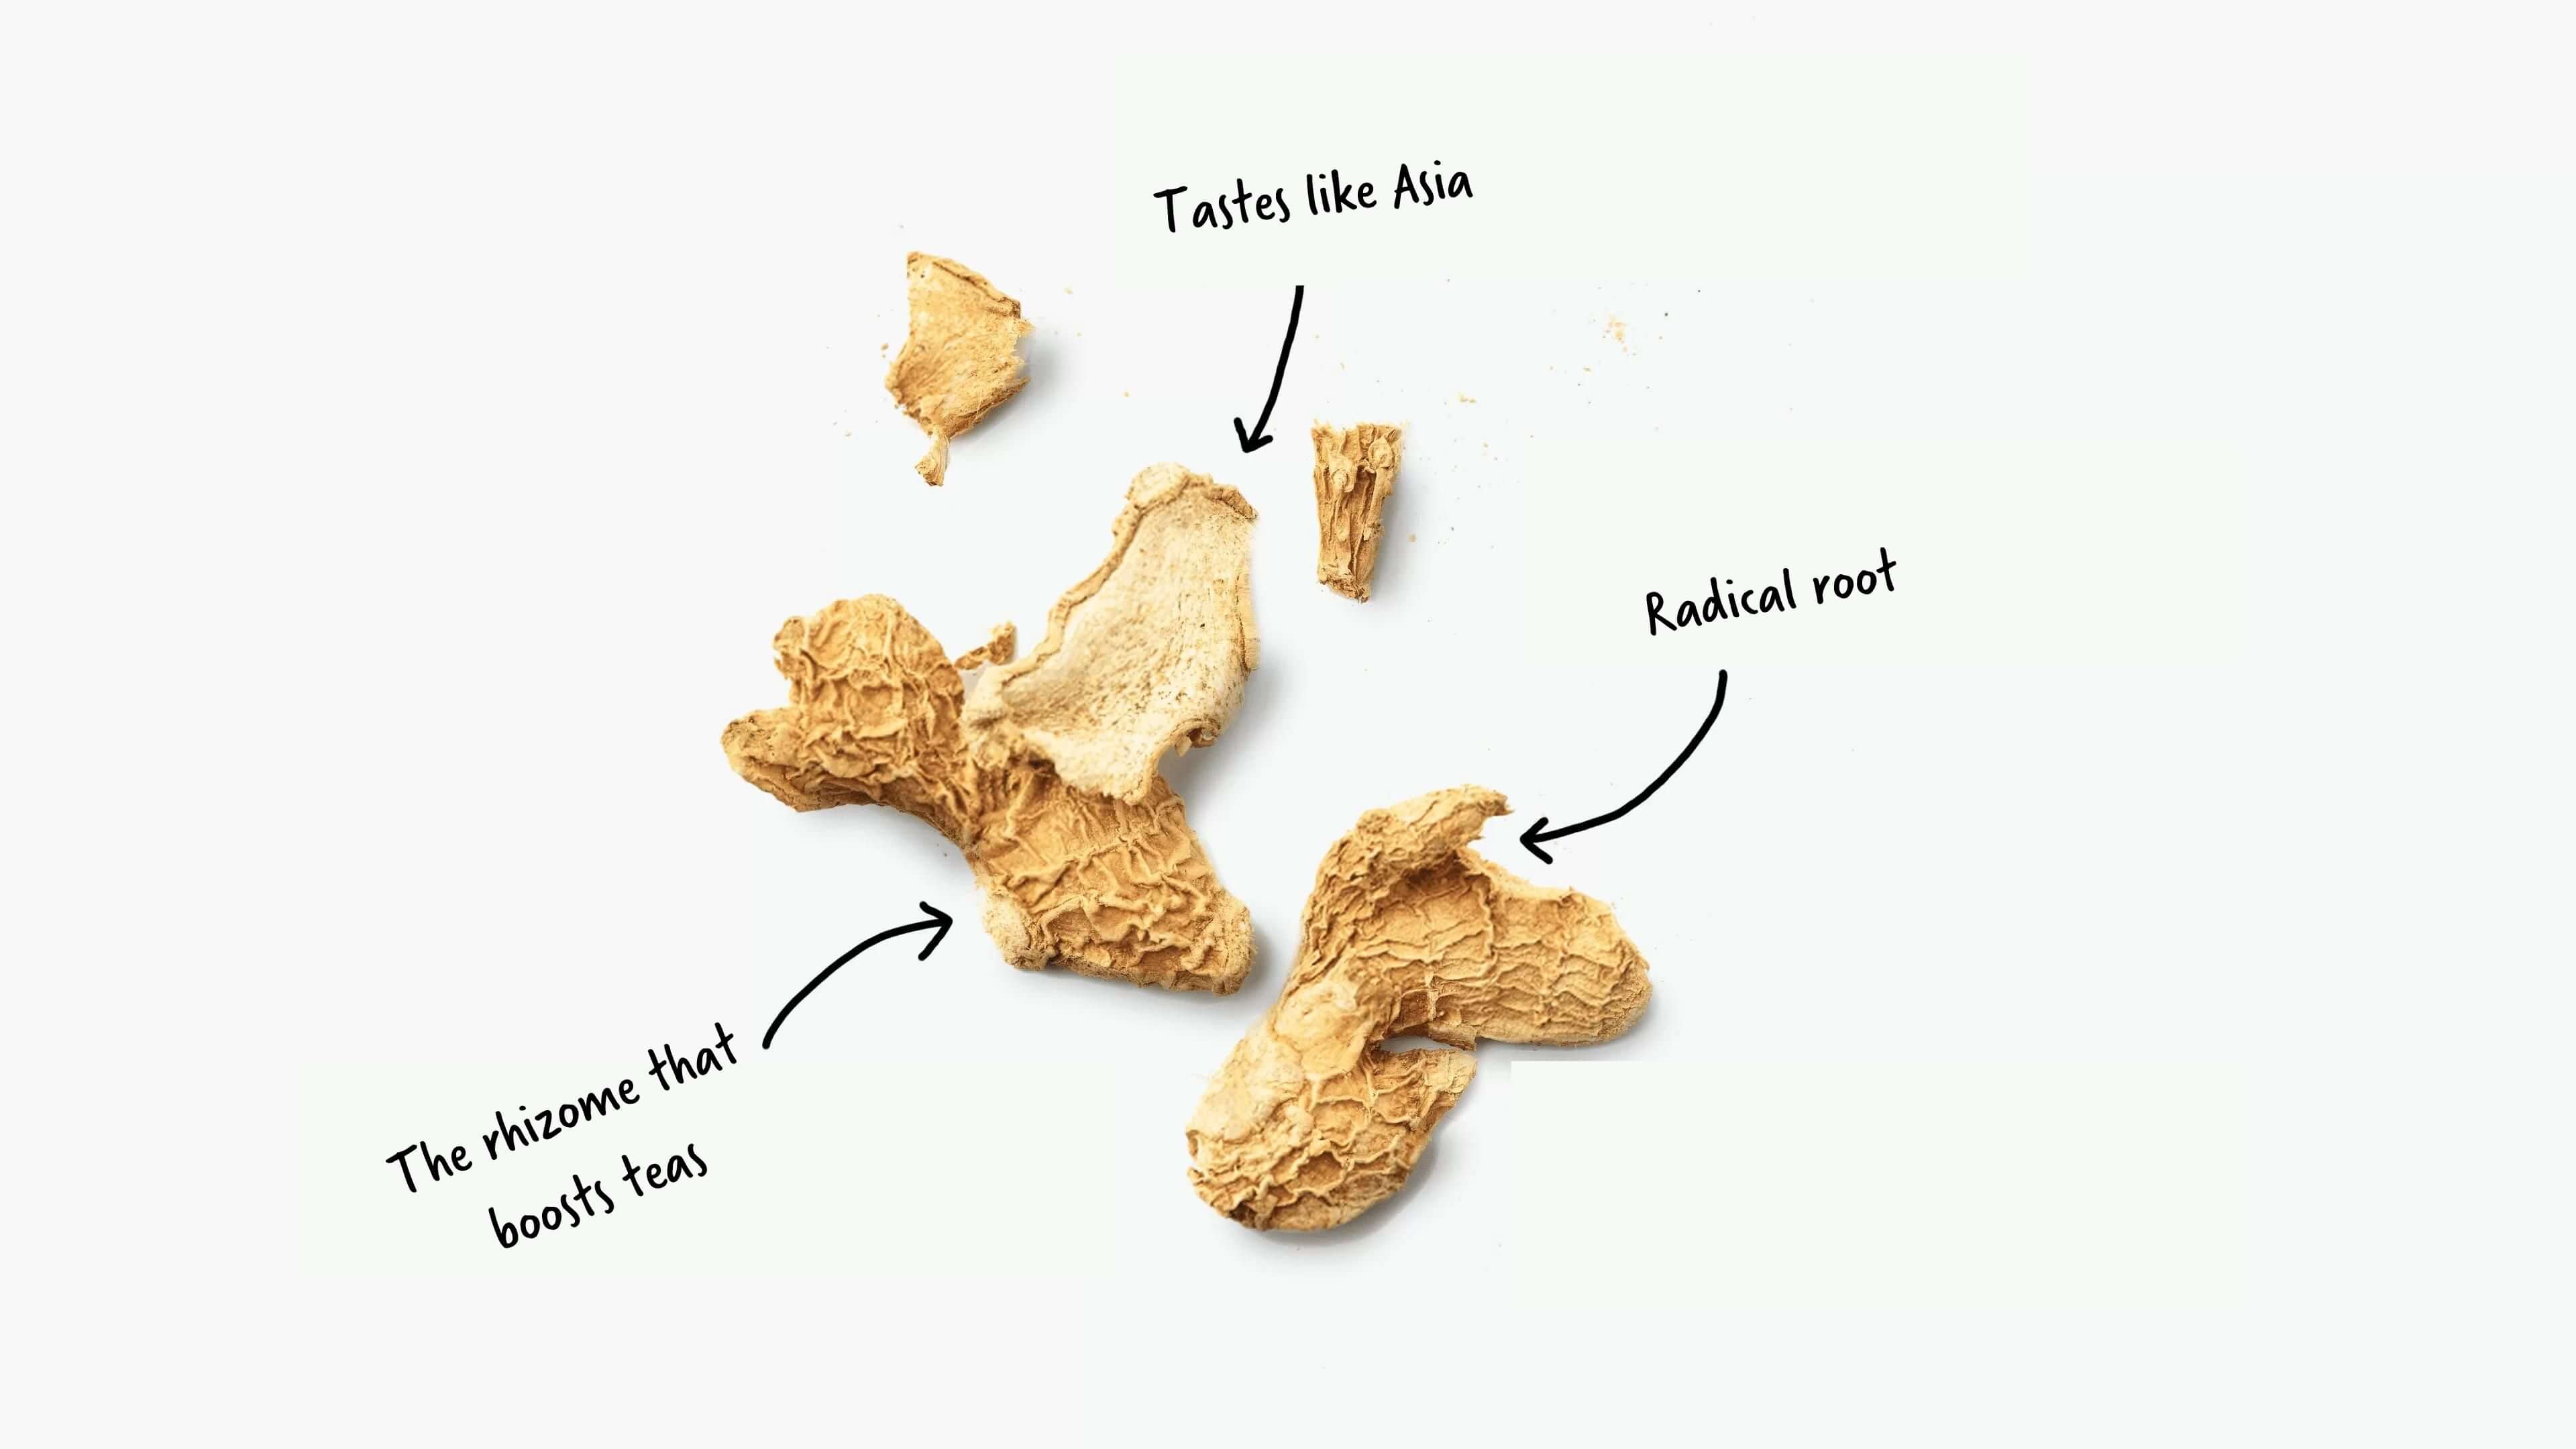 dried ginger will be used in herbal teas, no need for added flavourings